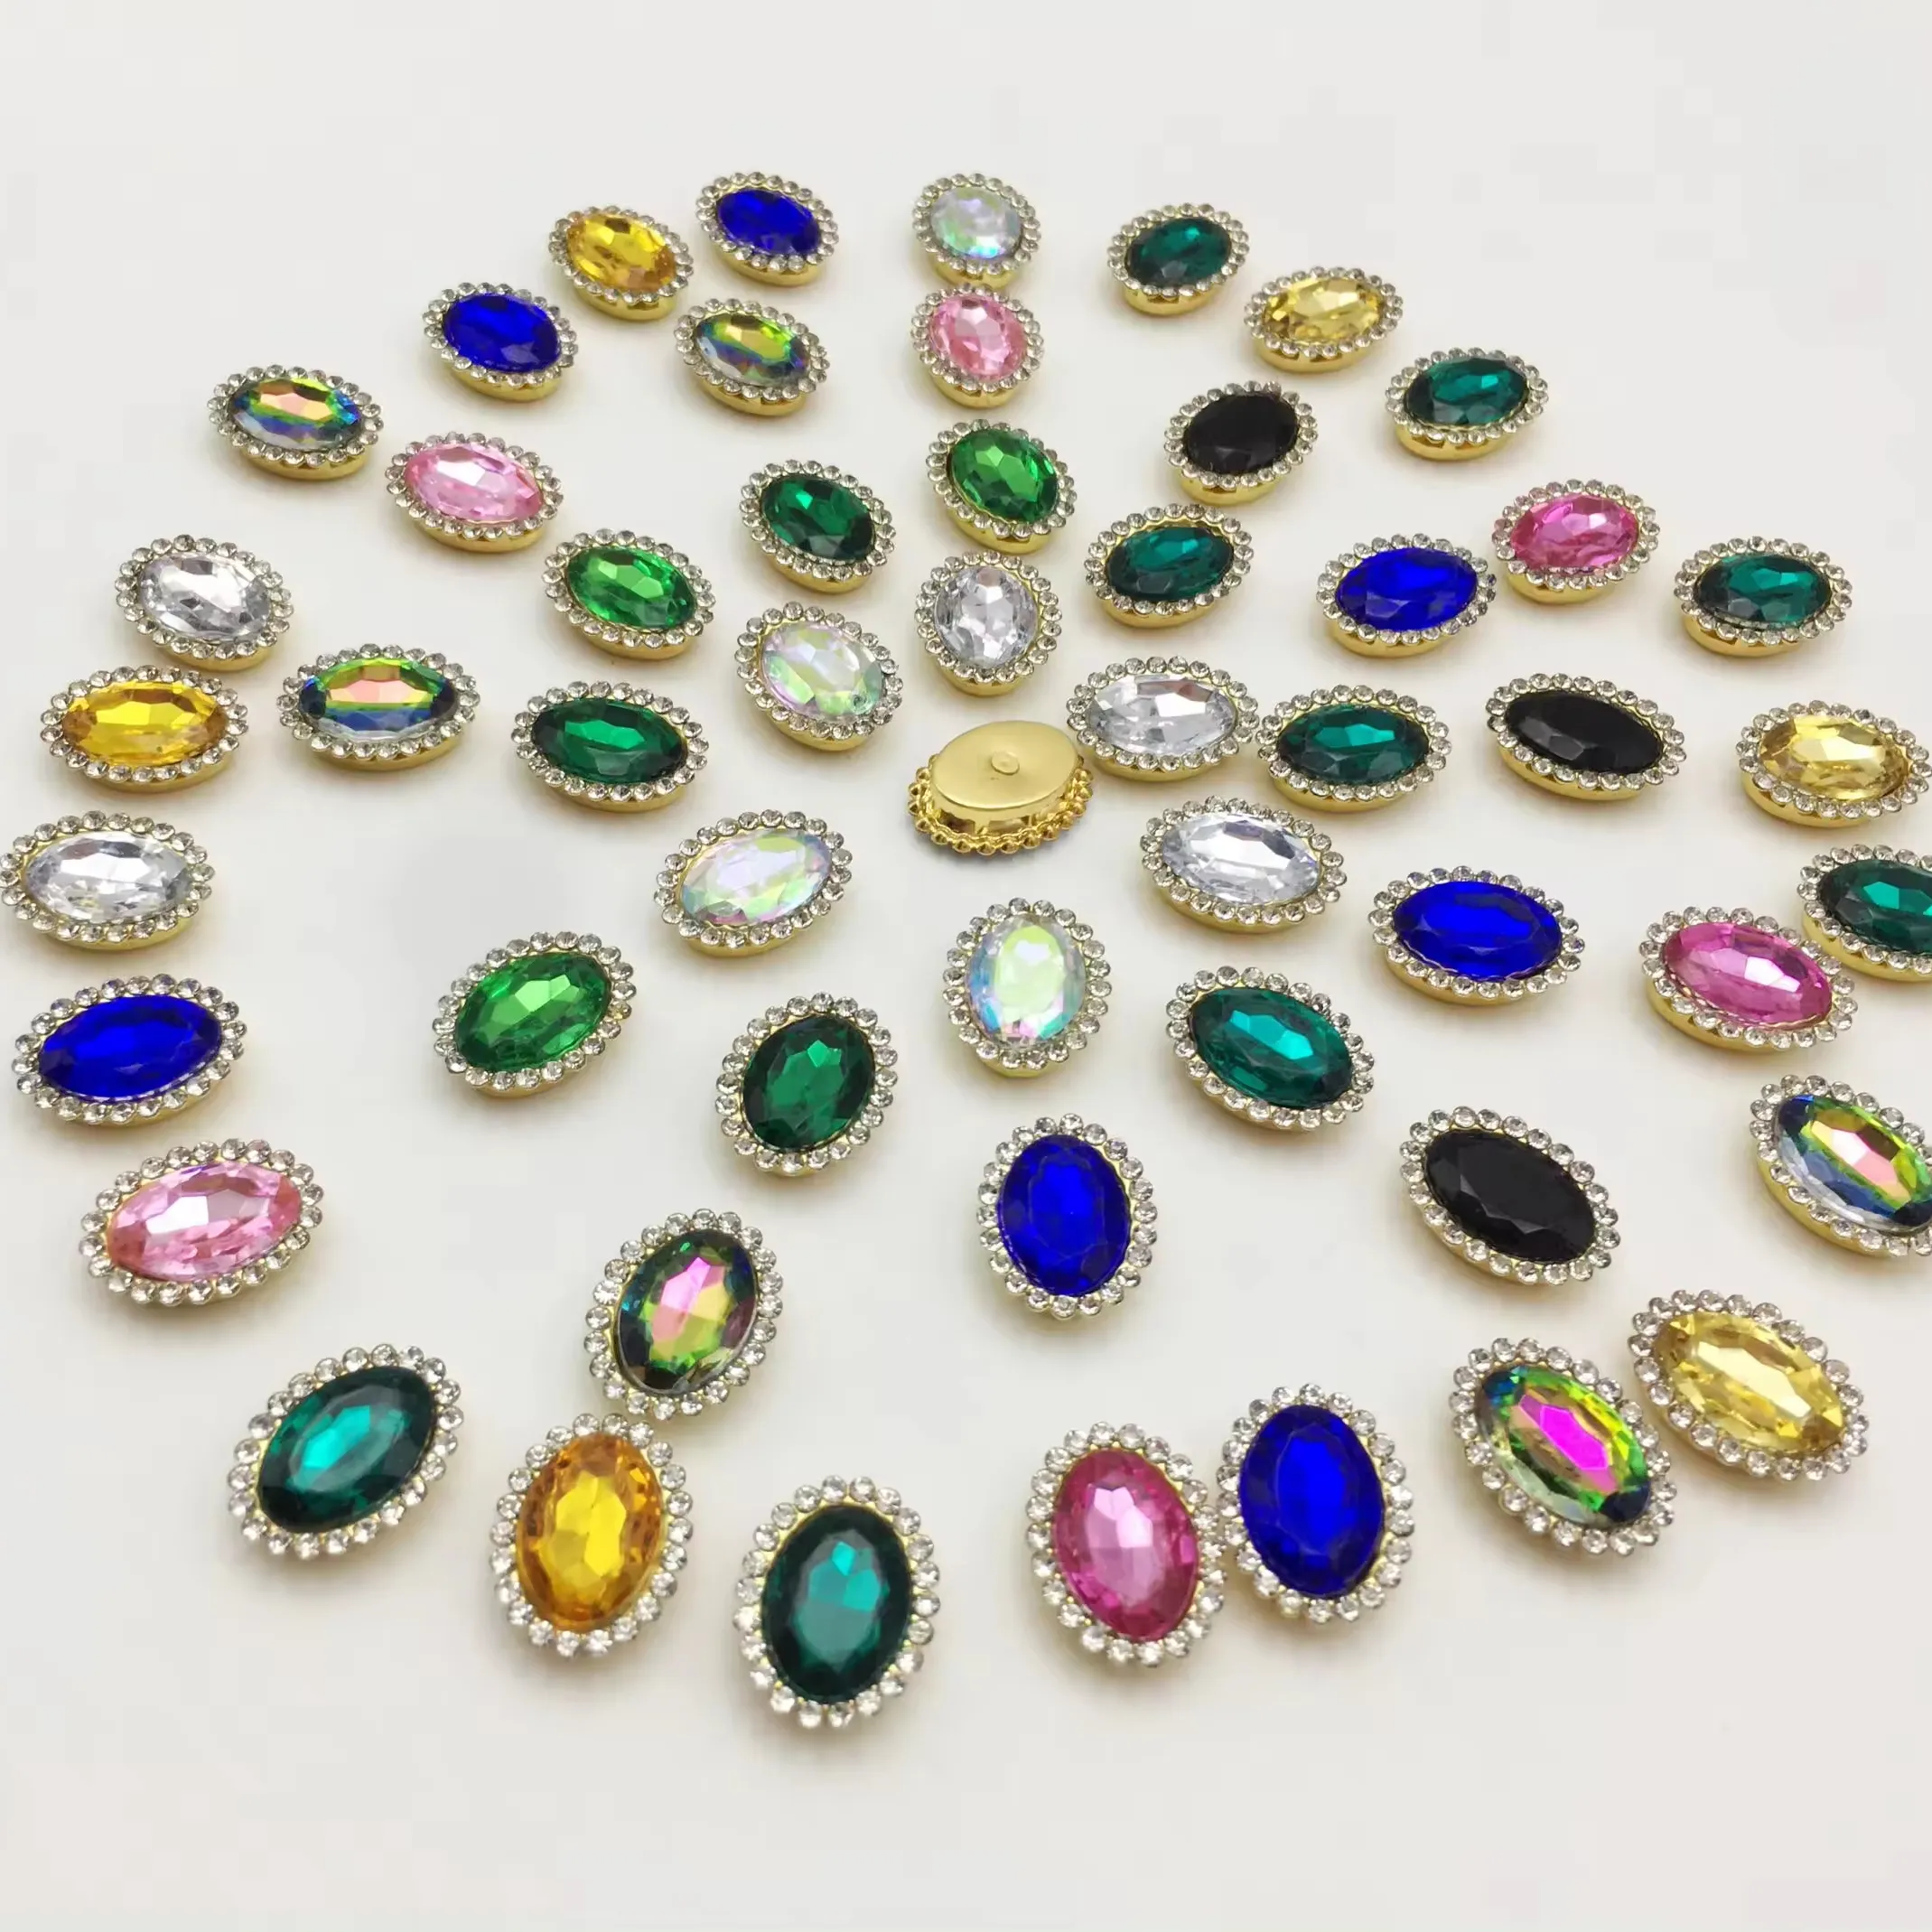 Wholesale 10x14mm Elliptic Crystal Loose Rhinestone Beads Flatback Drop Shape for Shoes Garments Bags-Multiple Colors Available